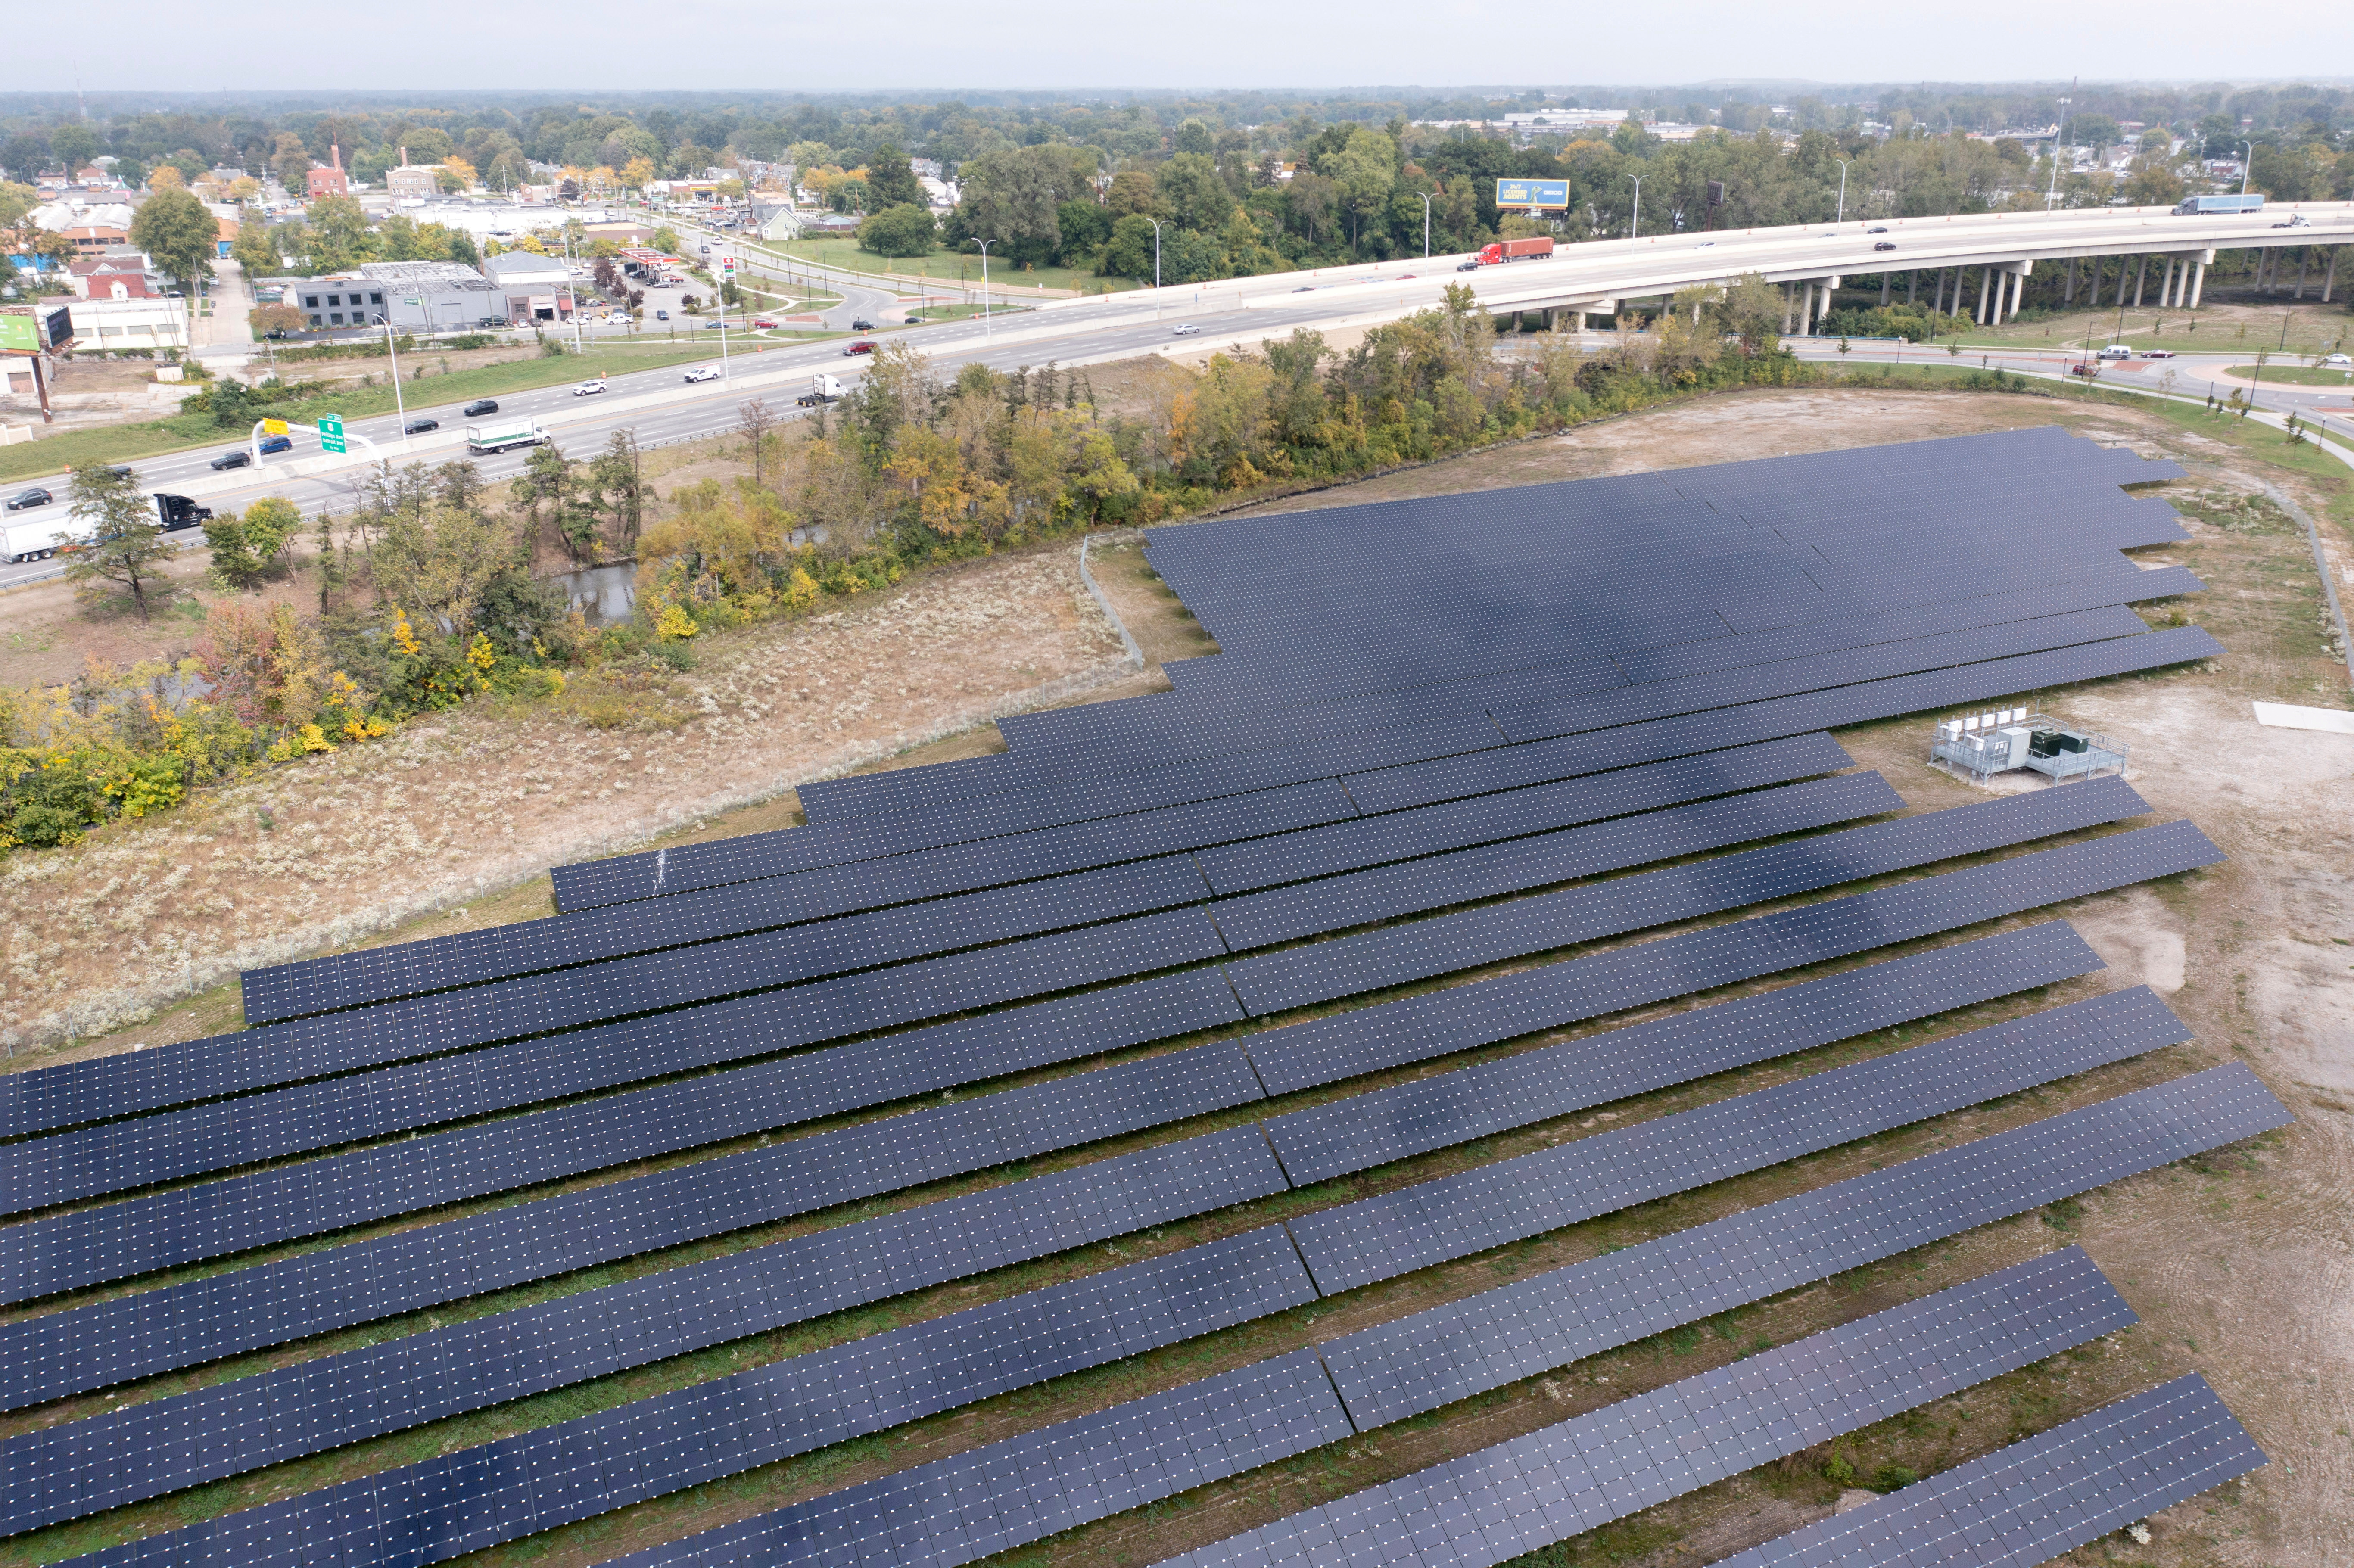 An aerial view shows solar panels made by First Solar, during a tour of the Overland Park Solar Array in Toledo, Ohio, U.S., October 5, 2021. Picture taken with a drone. Picture taken October 5, 2021. REUTERS/Dane Rhys